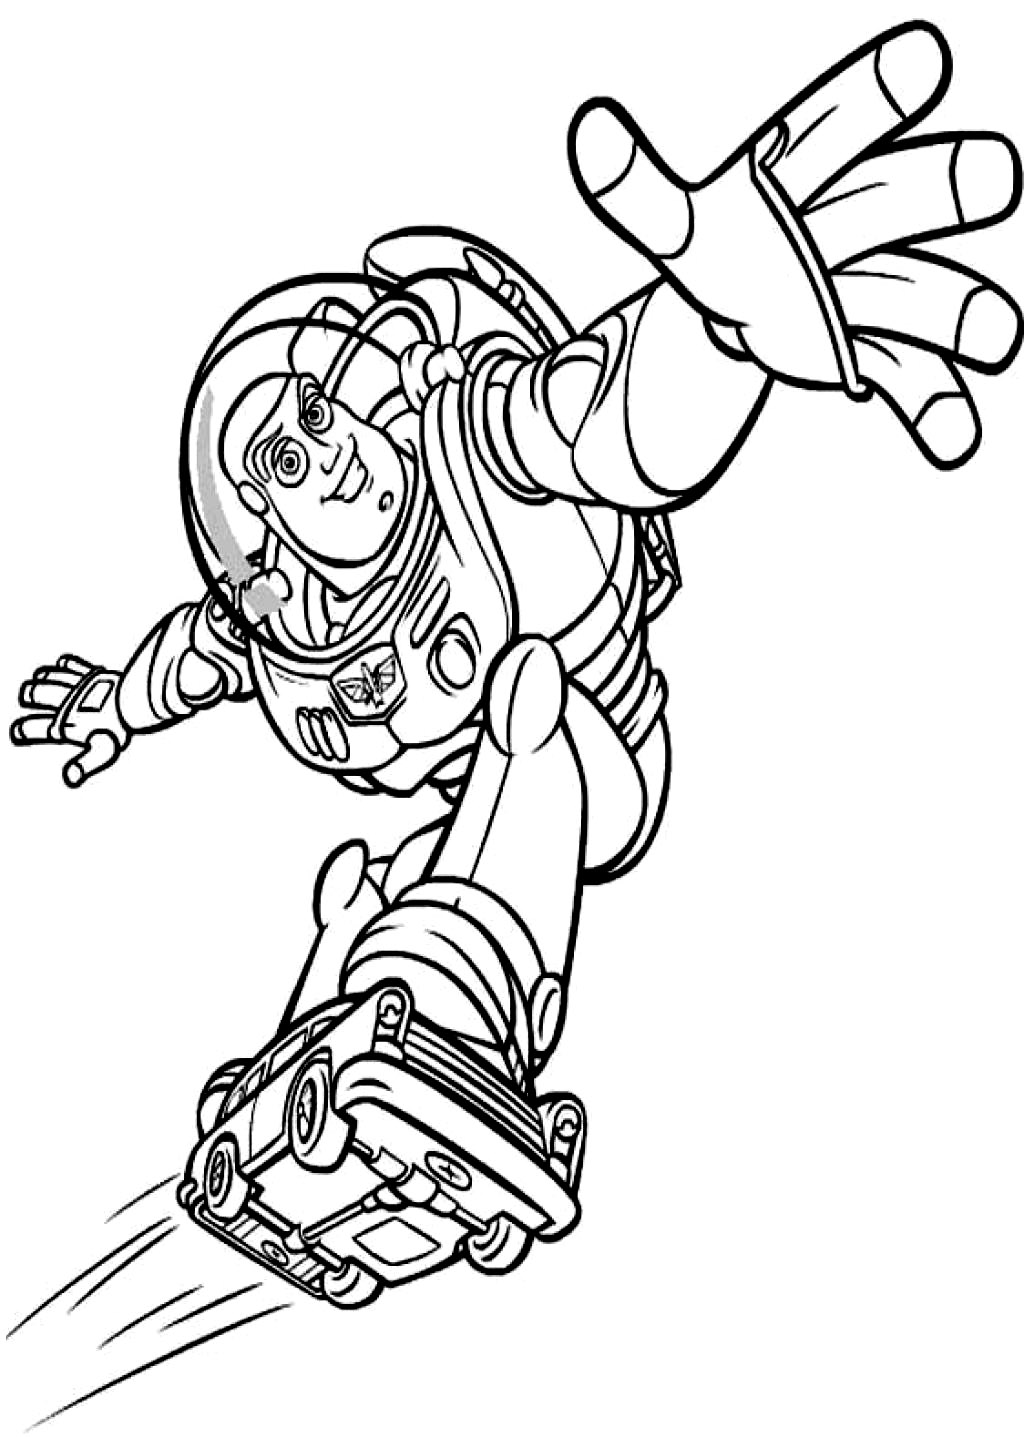 buzz lightyear flying coloring pages